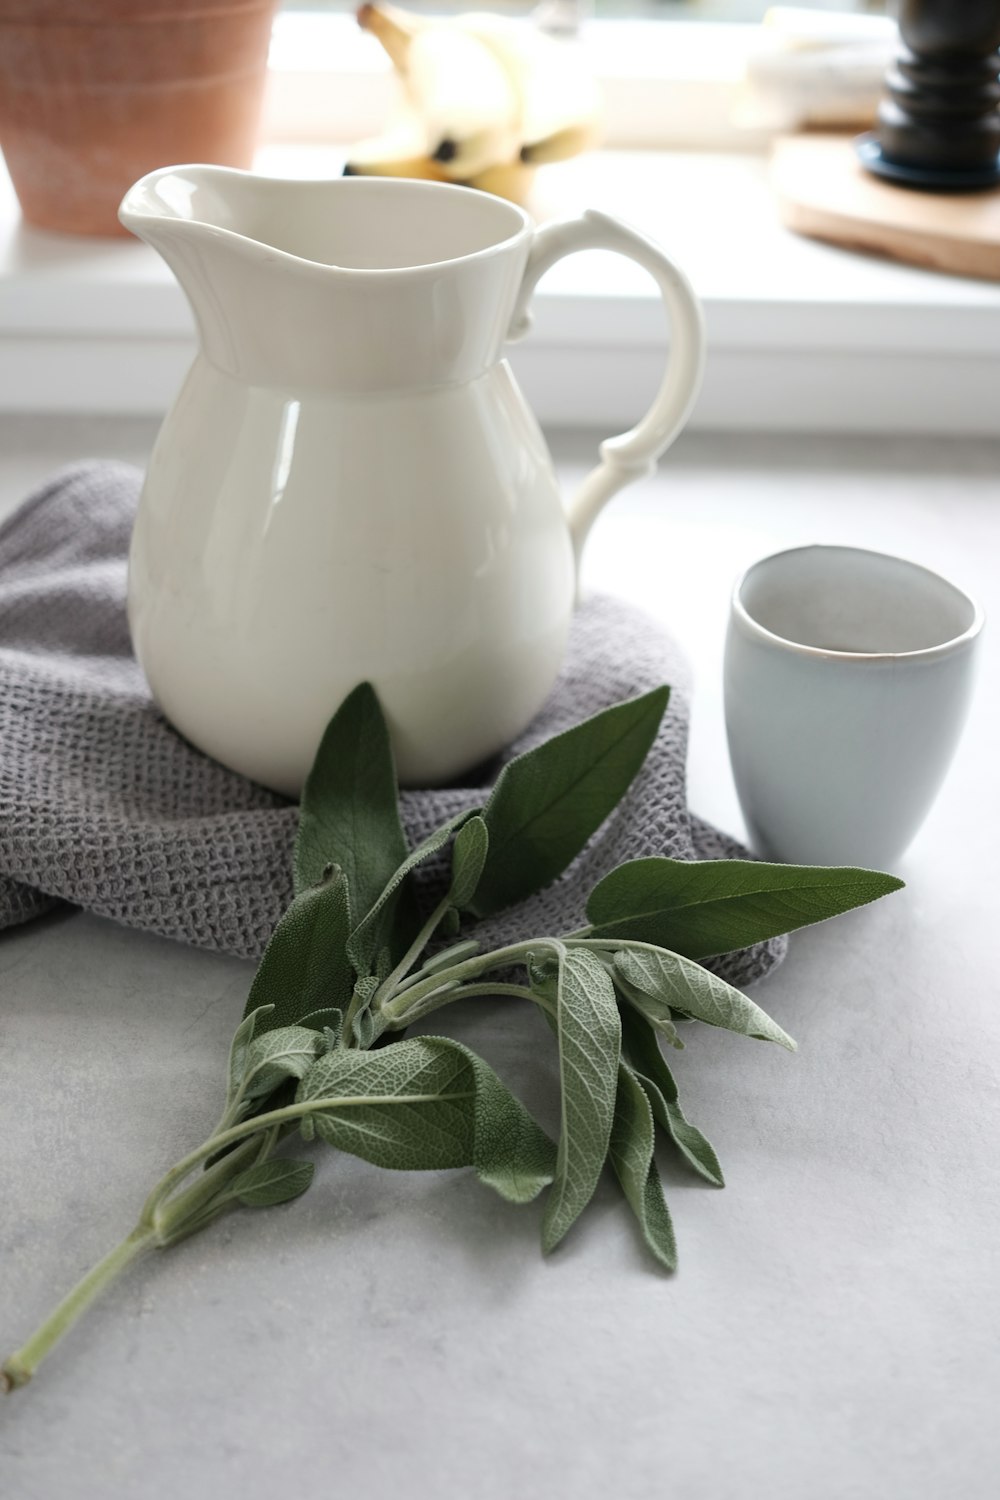 white ceramic pitcher beside green plant on white table